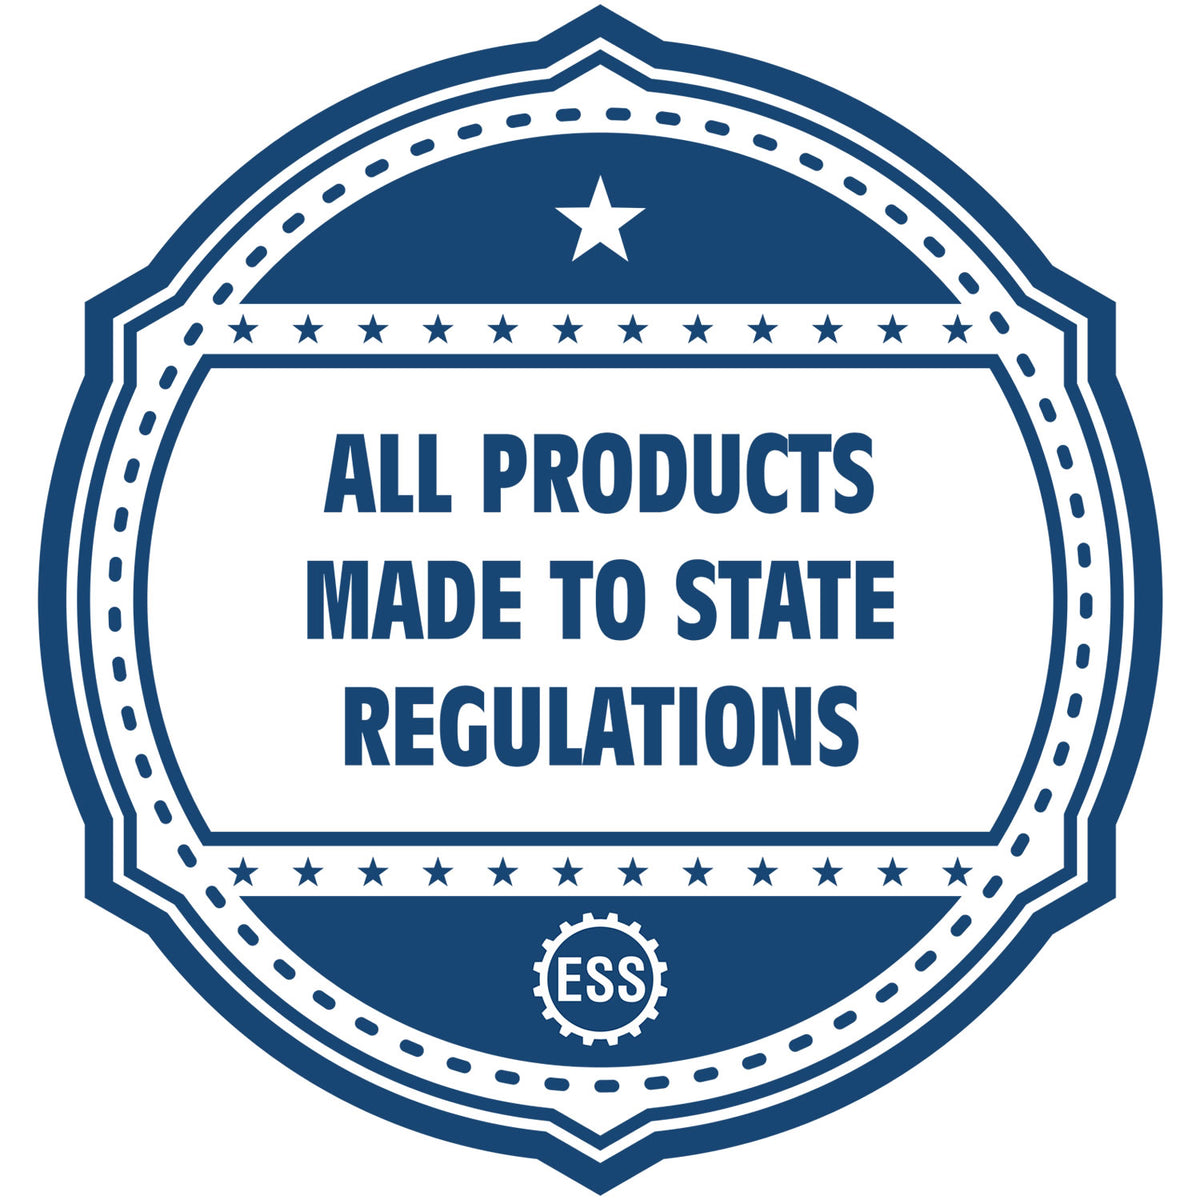 An icon or badge element for the Super Slim Maryland Notary Public Stamp showing that this product is made in compliance with state regulations.